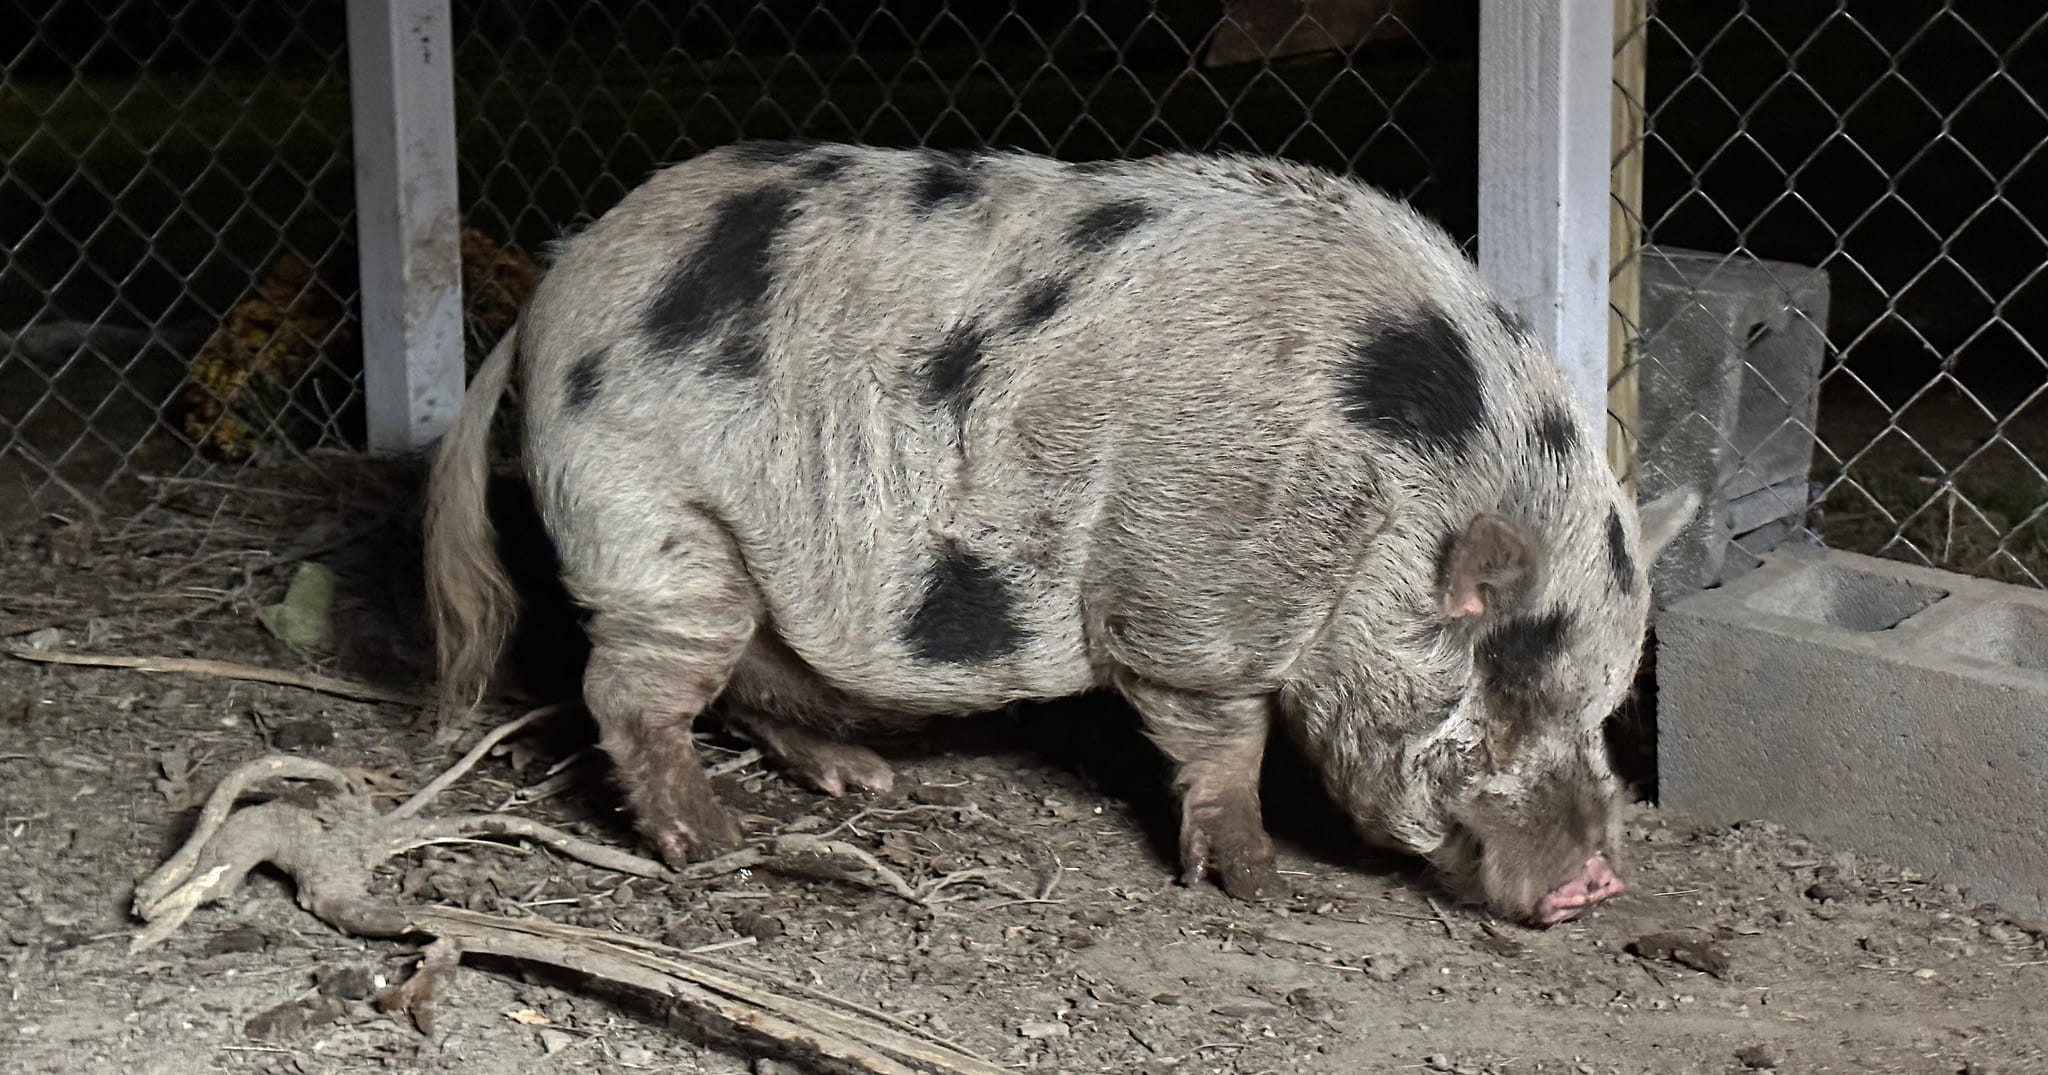 Escaped pig named “Kevin Bacon” home safe after two weeks on the run